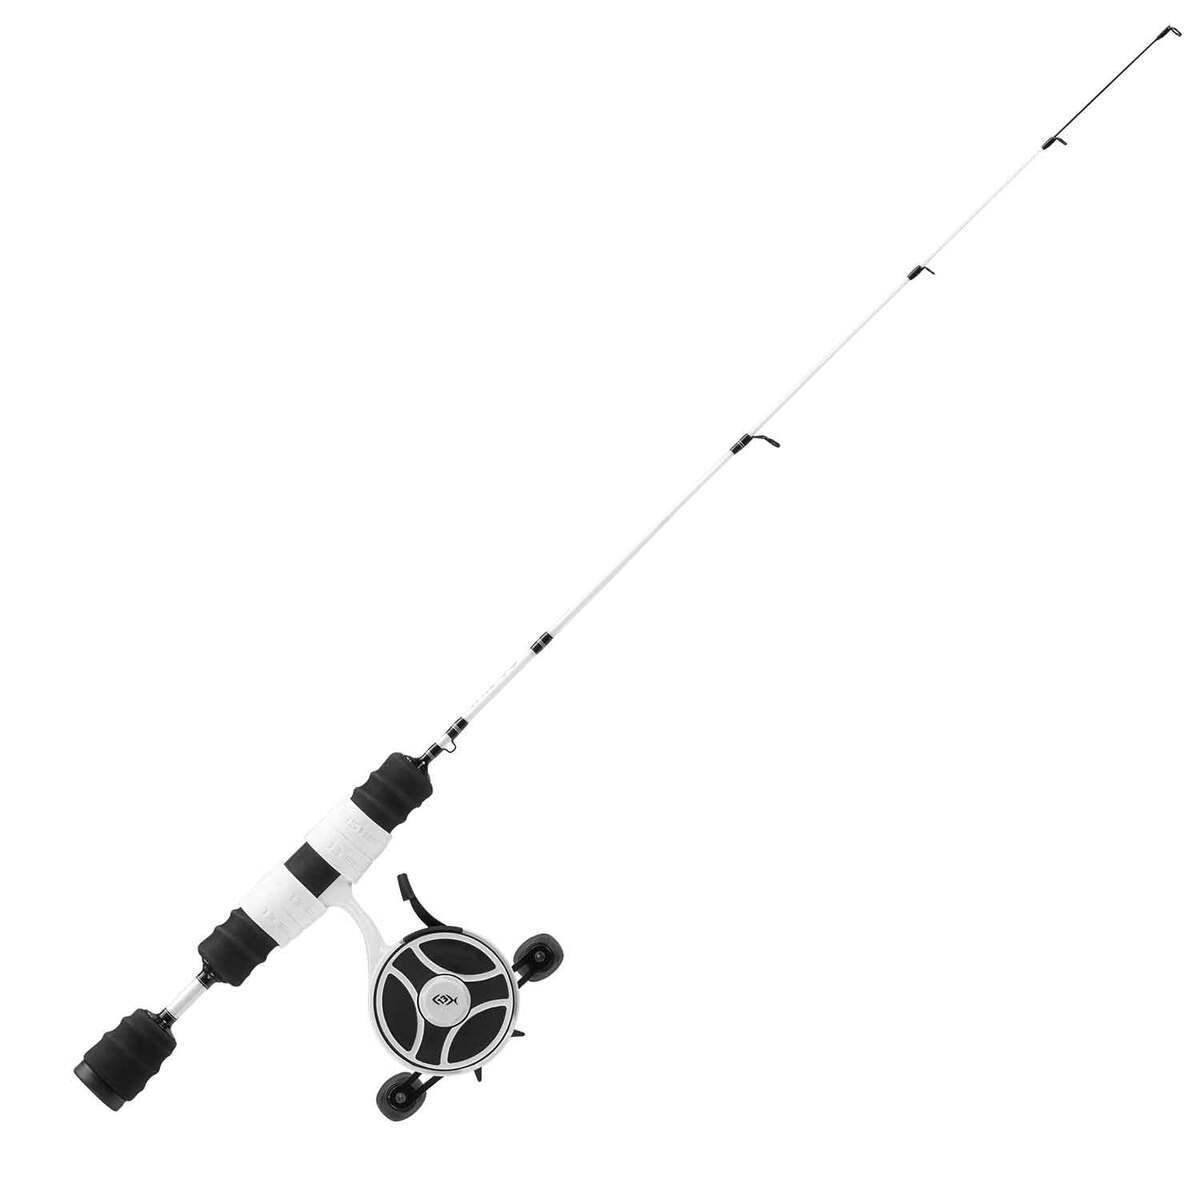 13 Fishing Freefall Ghost/Fate V3 Ice Fishing Rod and Reel Combo